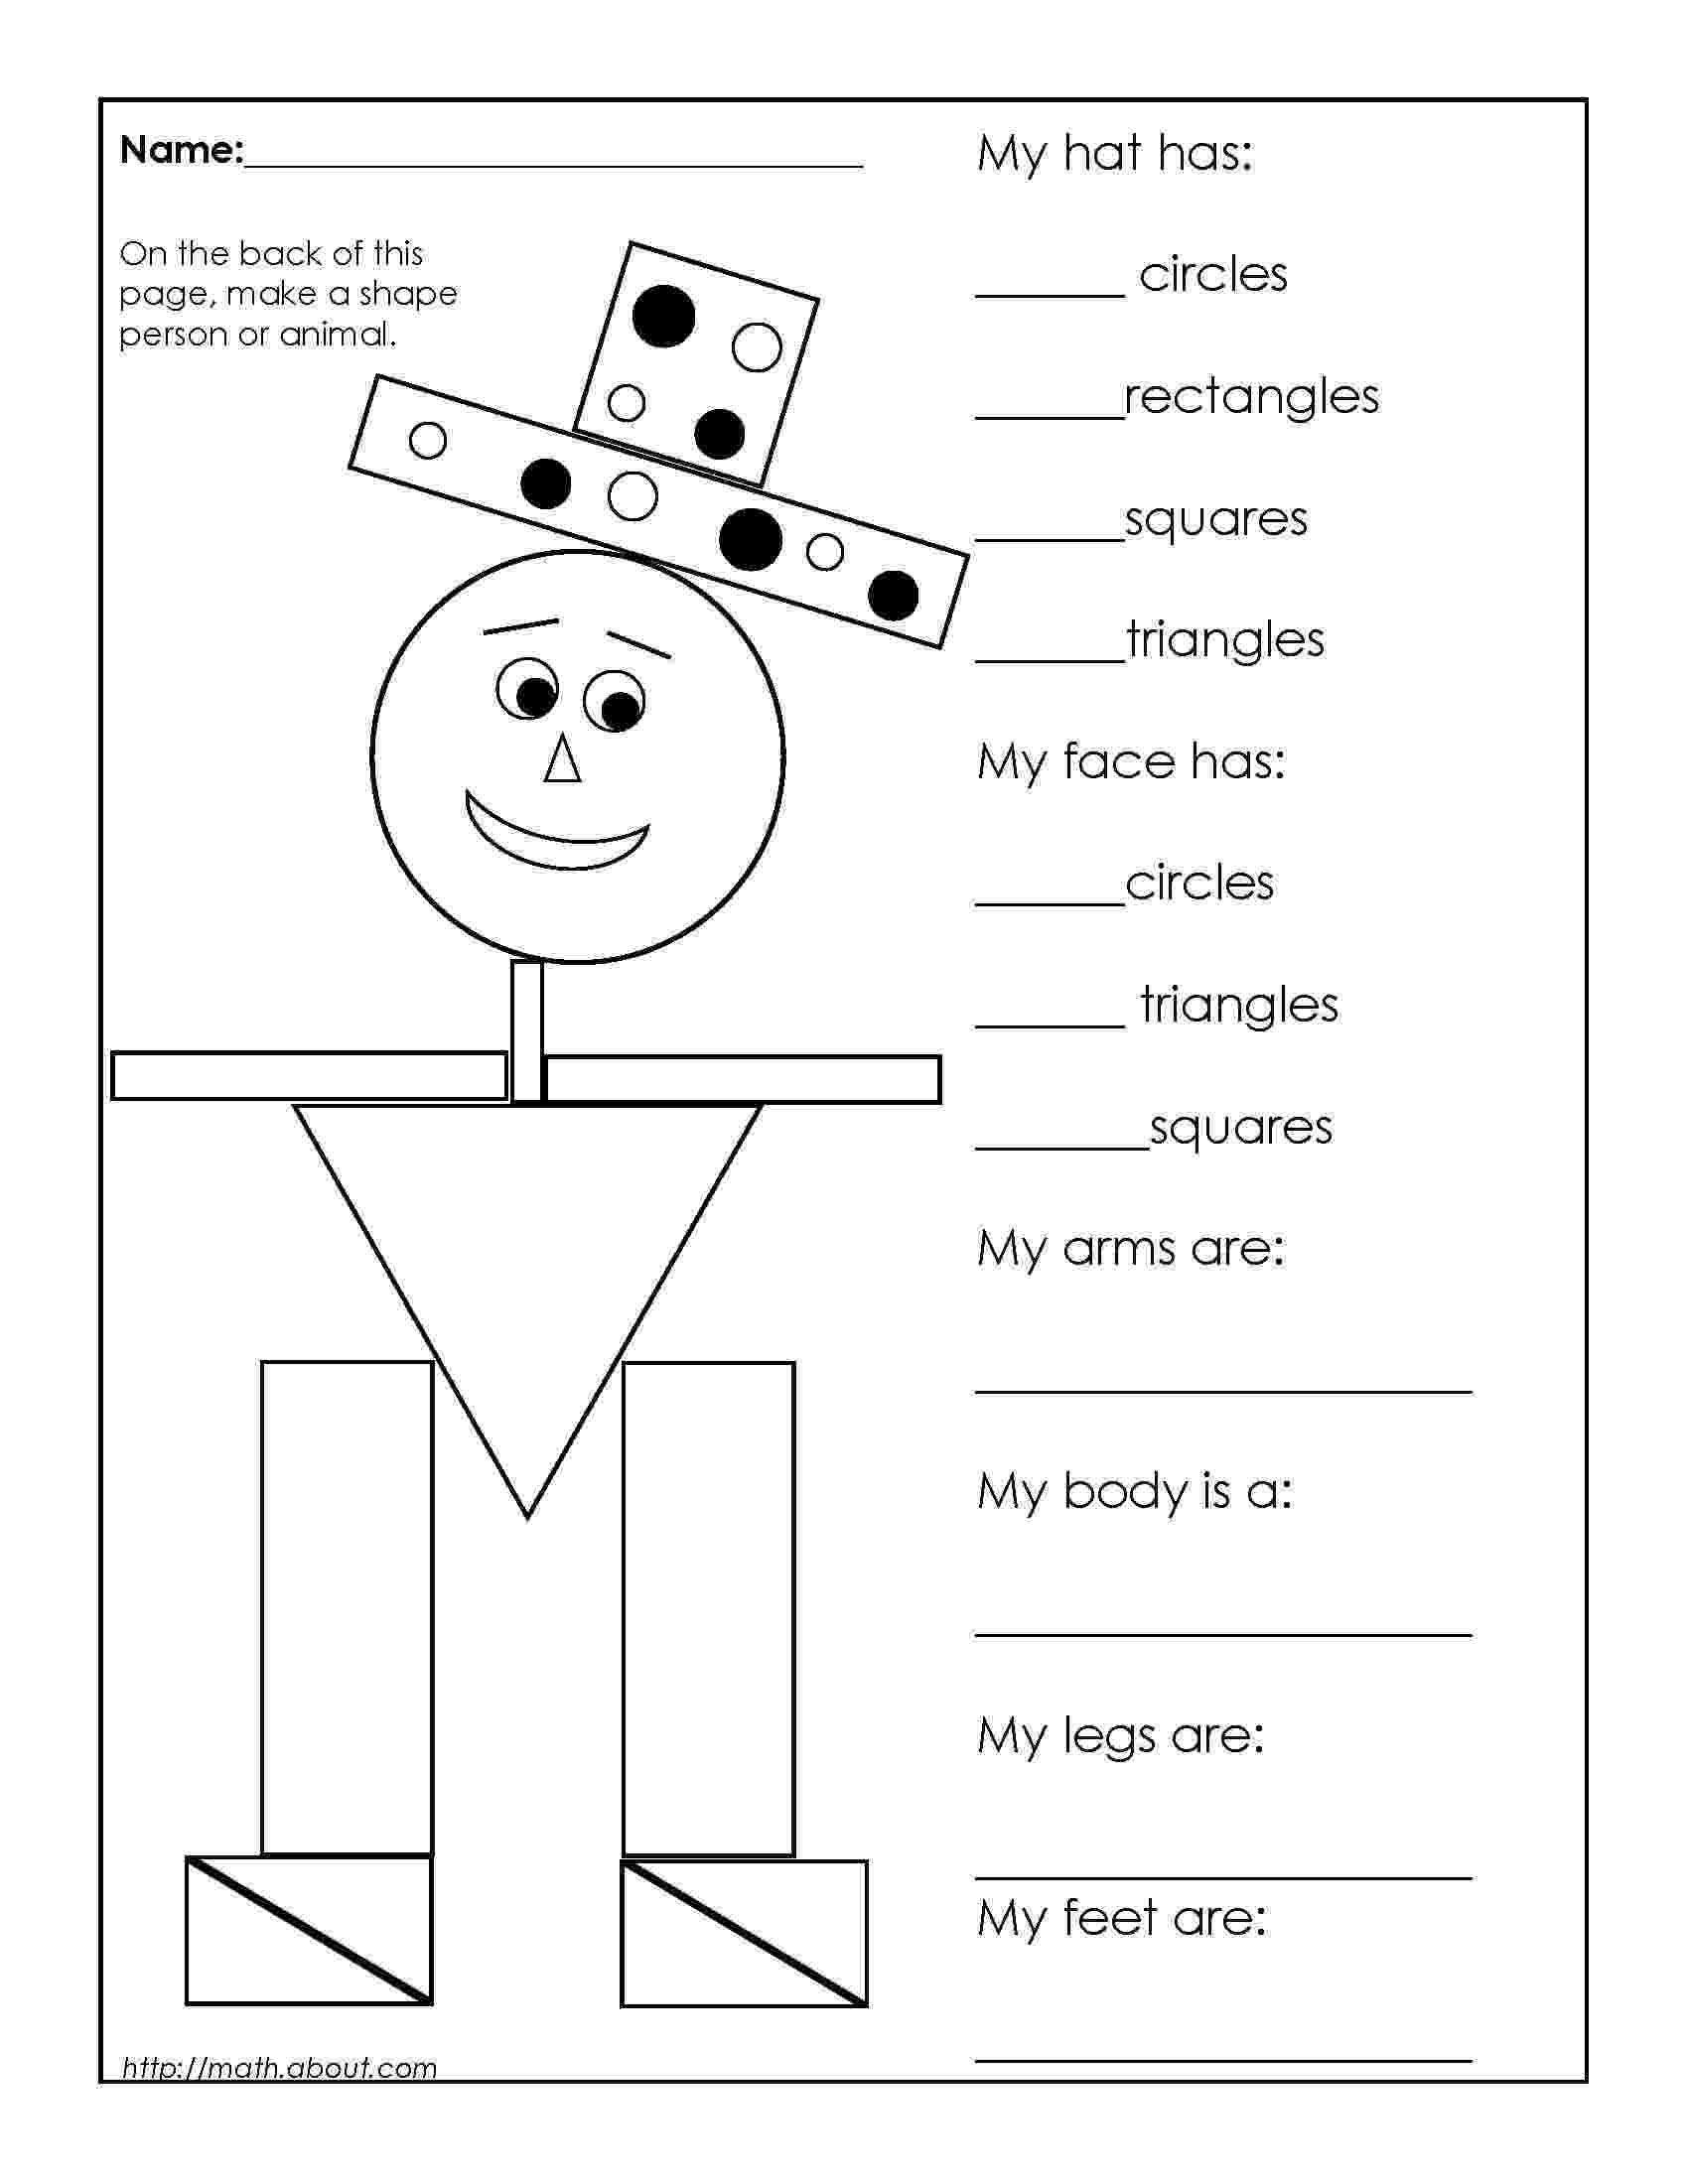 worksheets for grade 1 fun reading resources freebie all students can shine worksheets grade fun for 1 